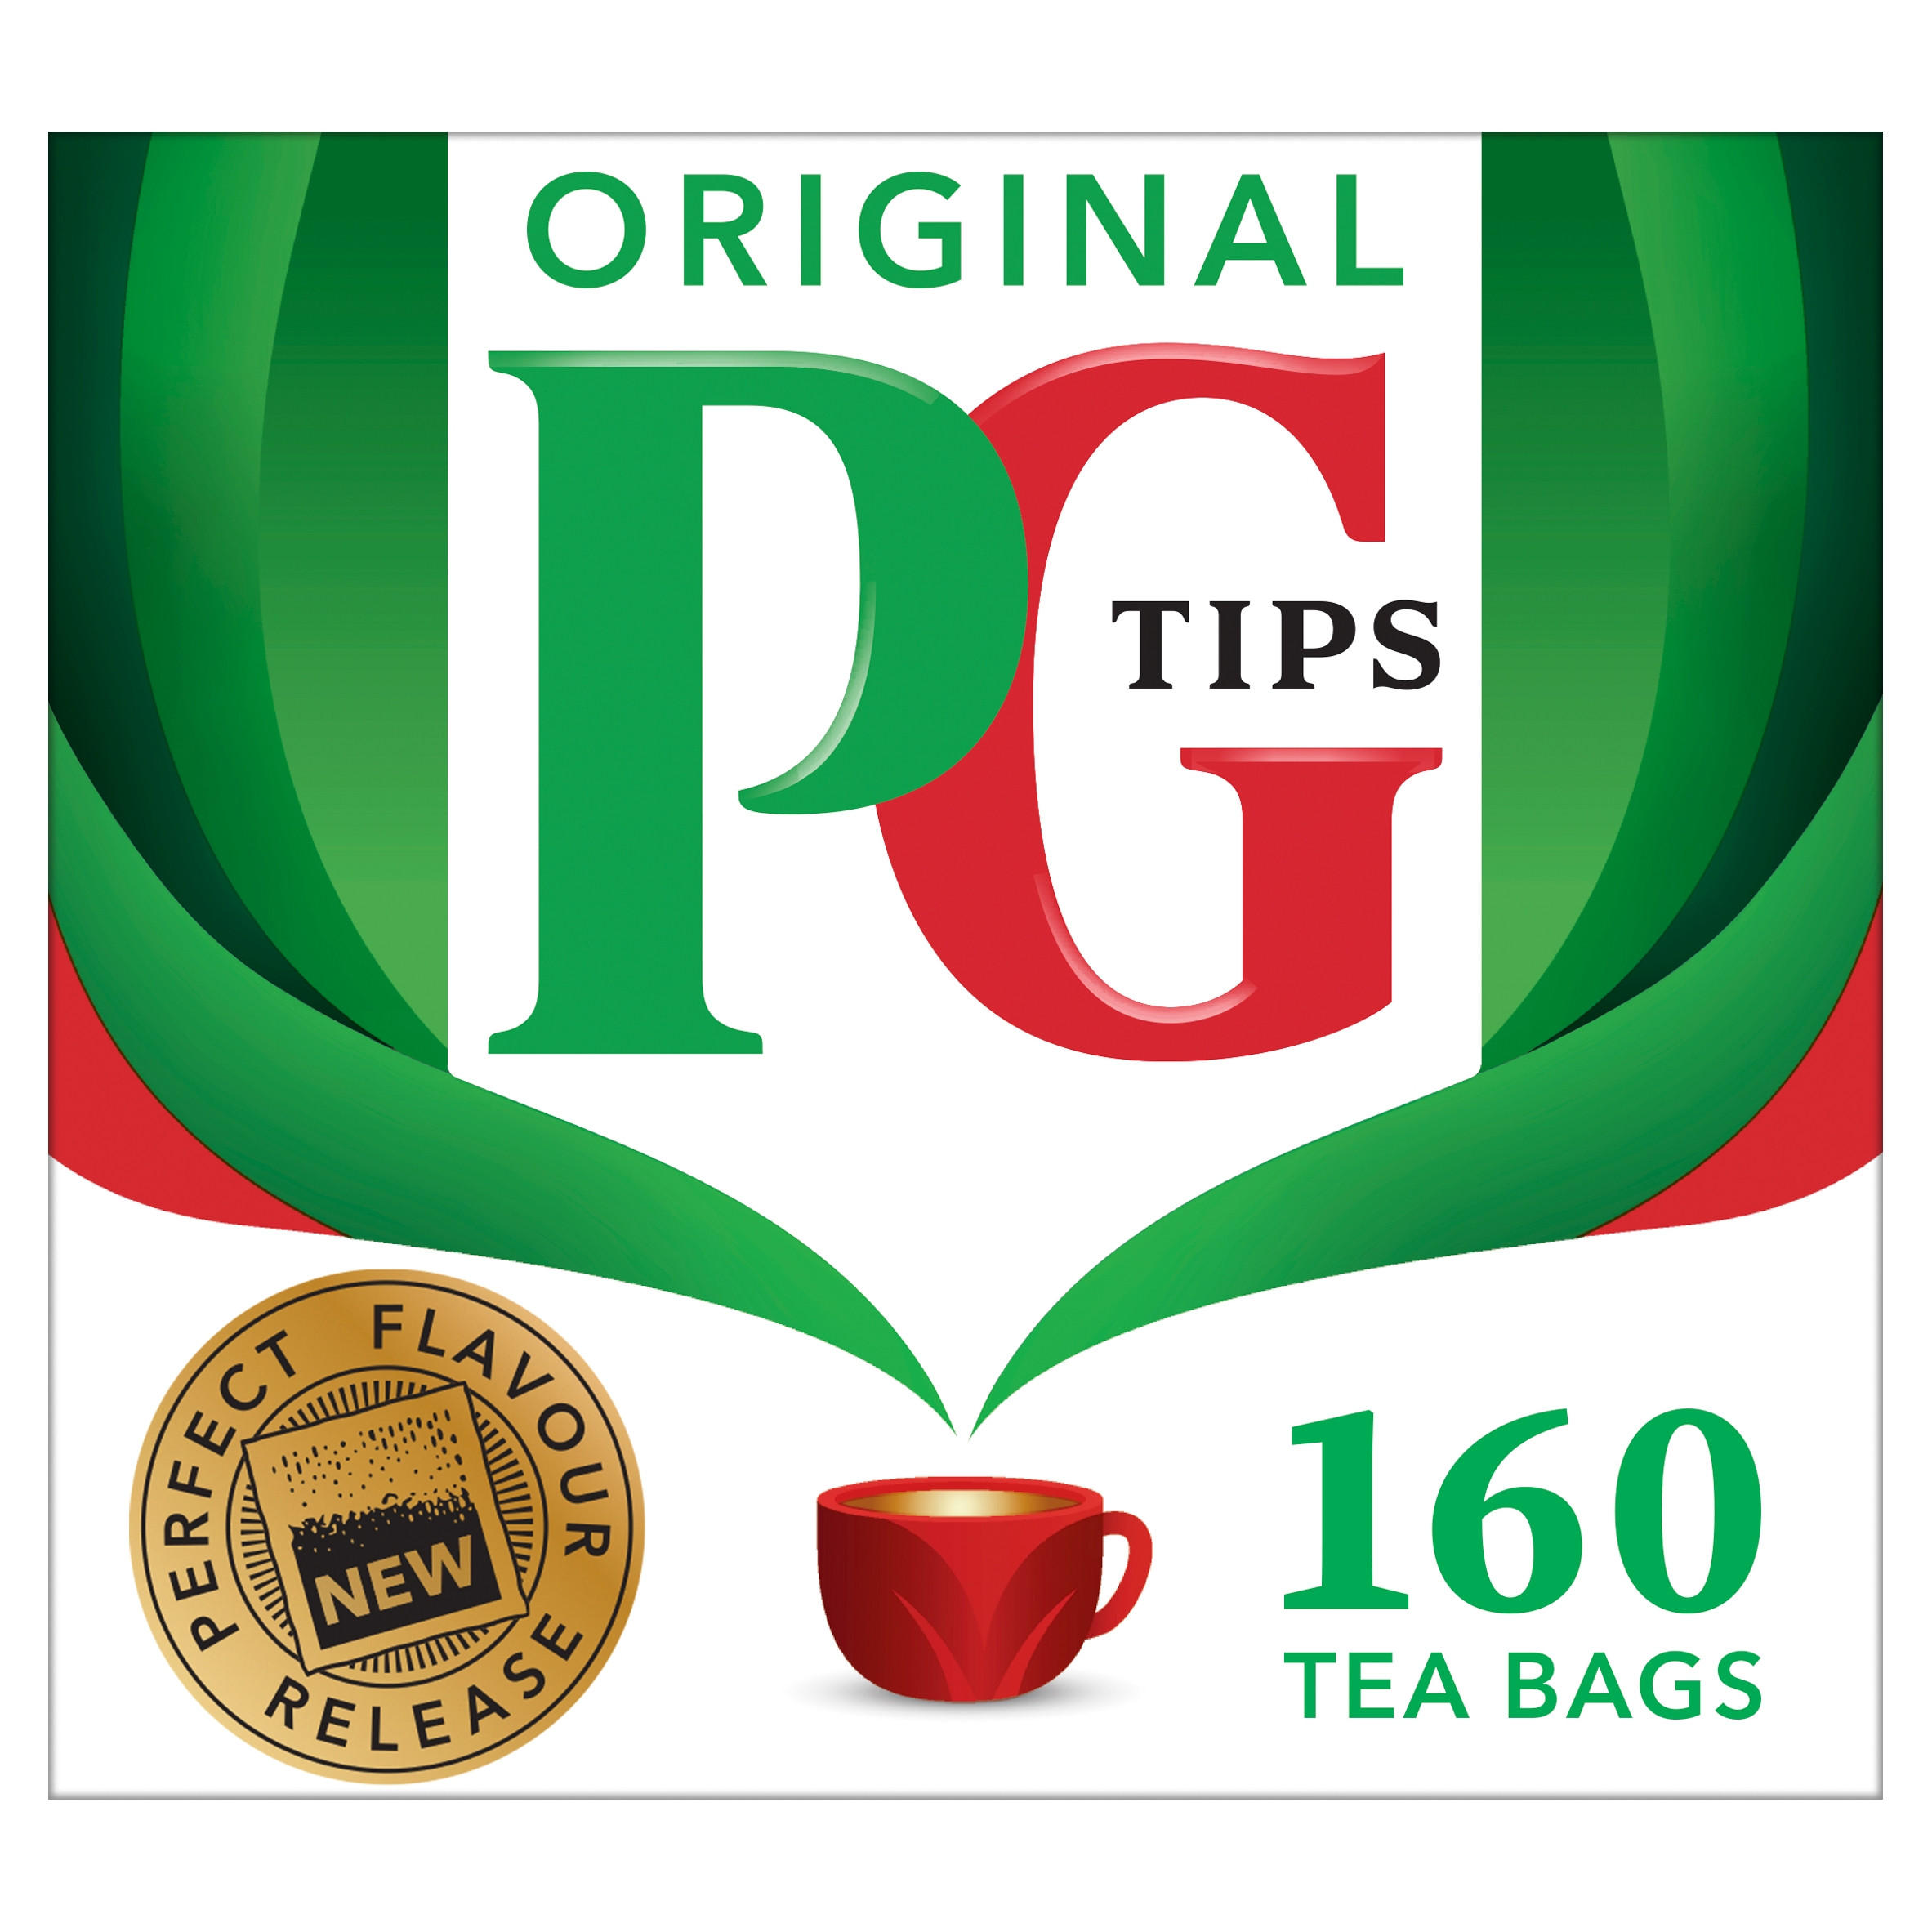 PG Tips 160 Tea Bags - What's Instore